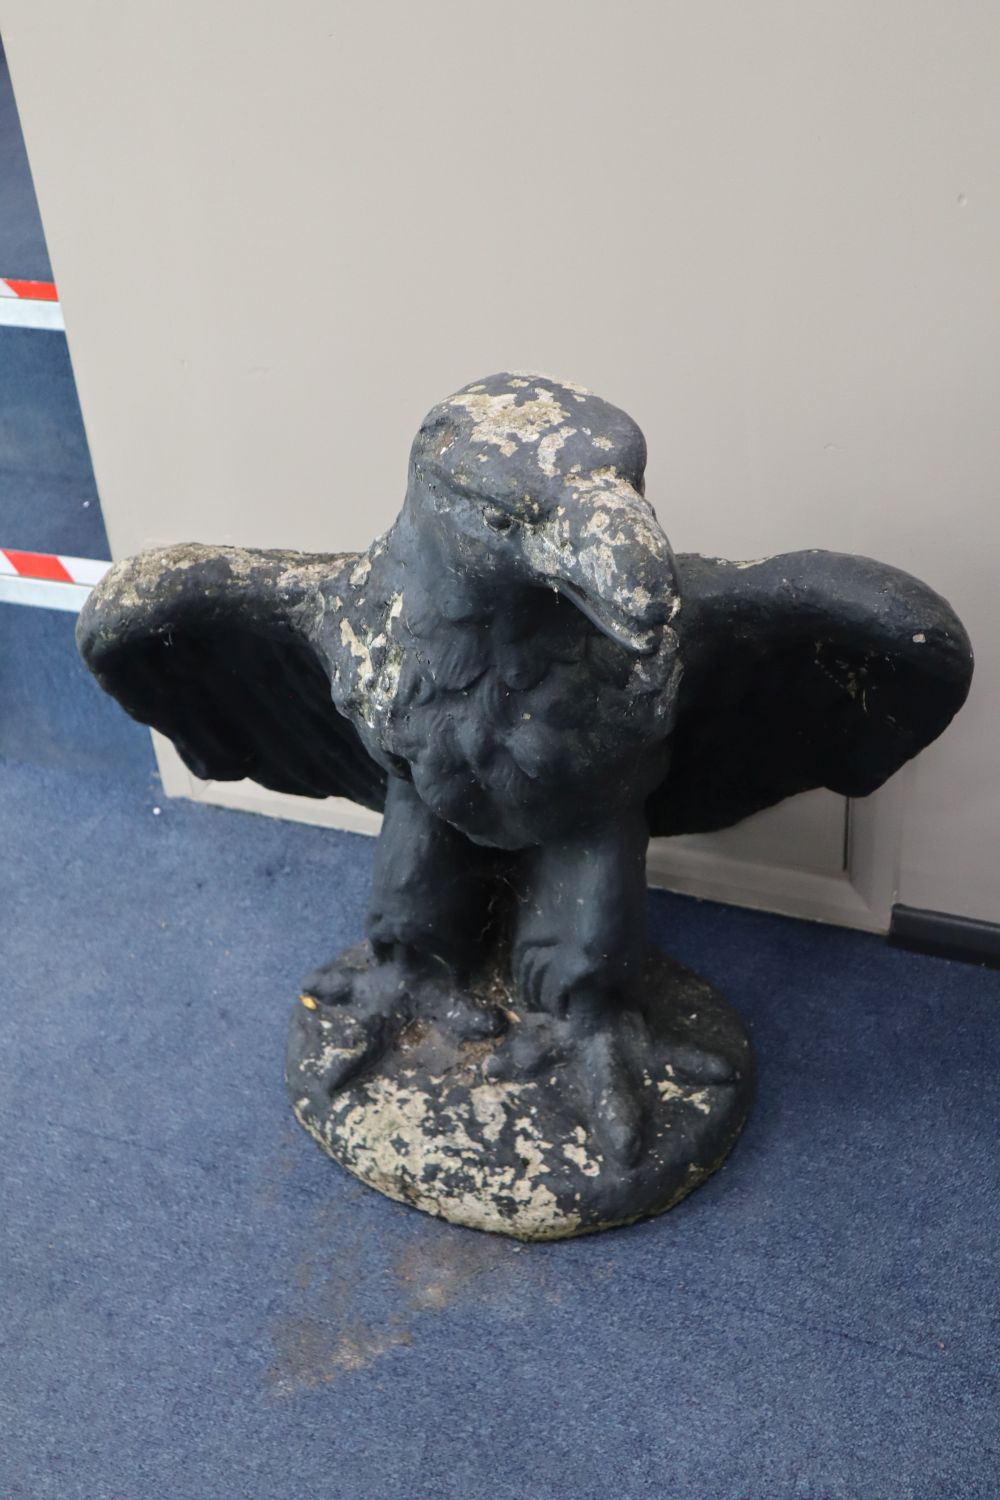 A pair of reconstituted stone eagle garden ornaments, height 78cm